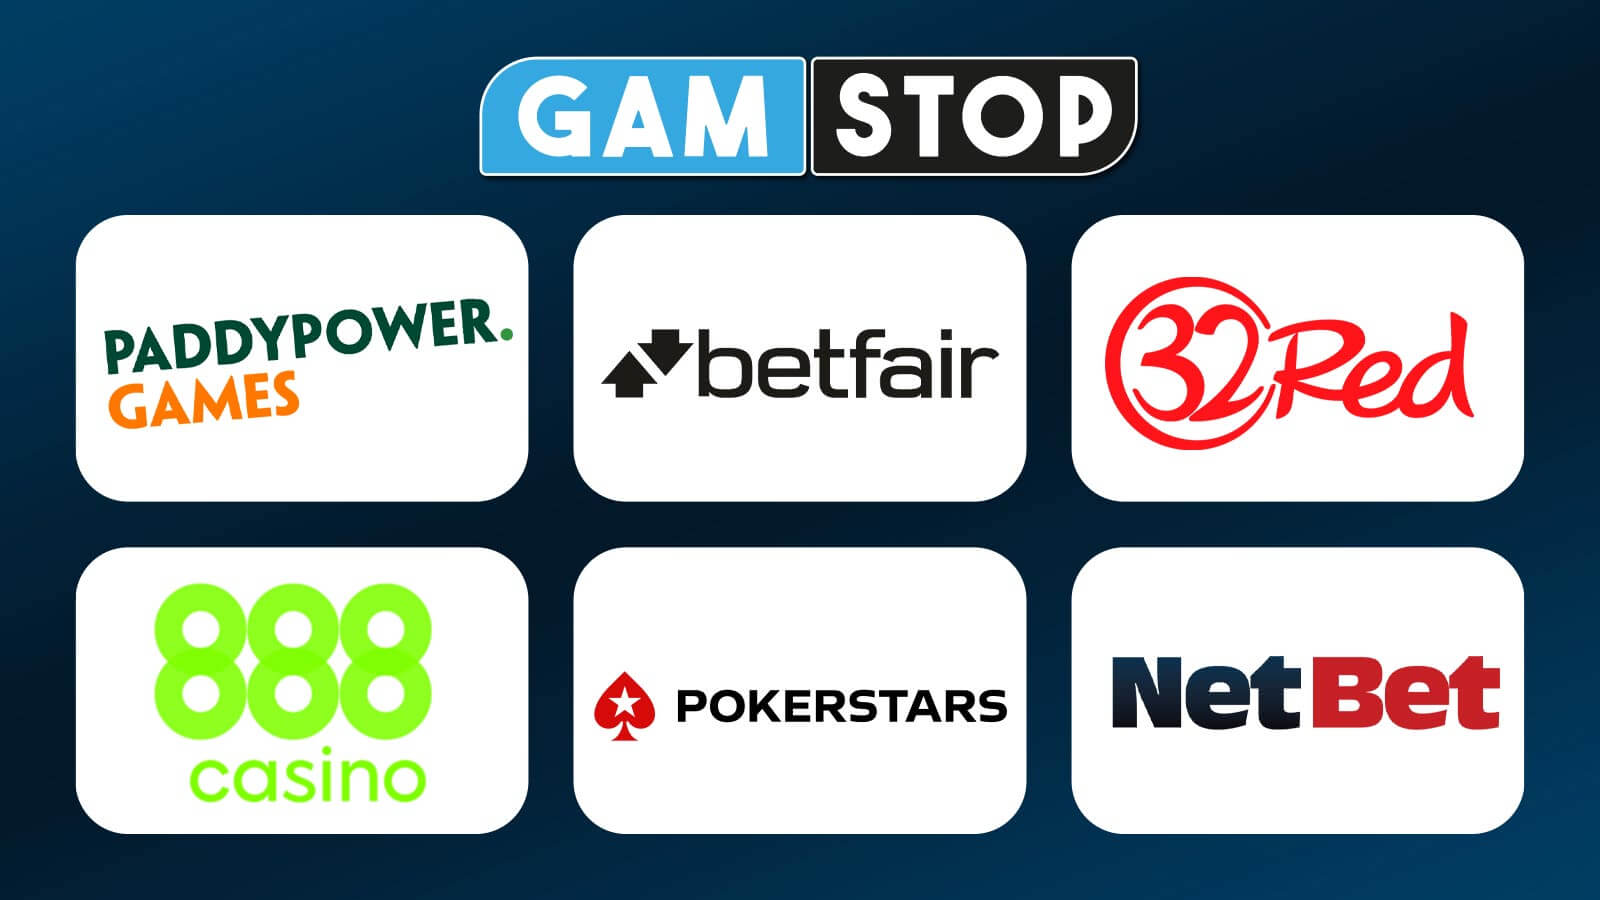 22 Very Simple Things You Can Do To Save Time With does Gamstop include national lottery